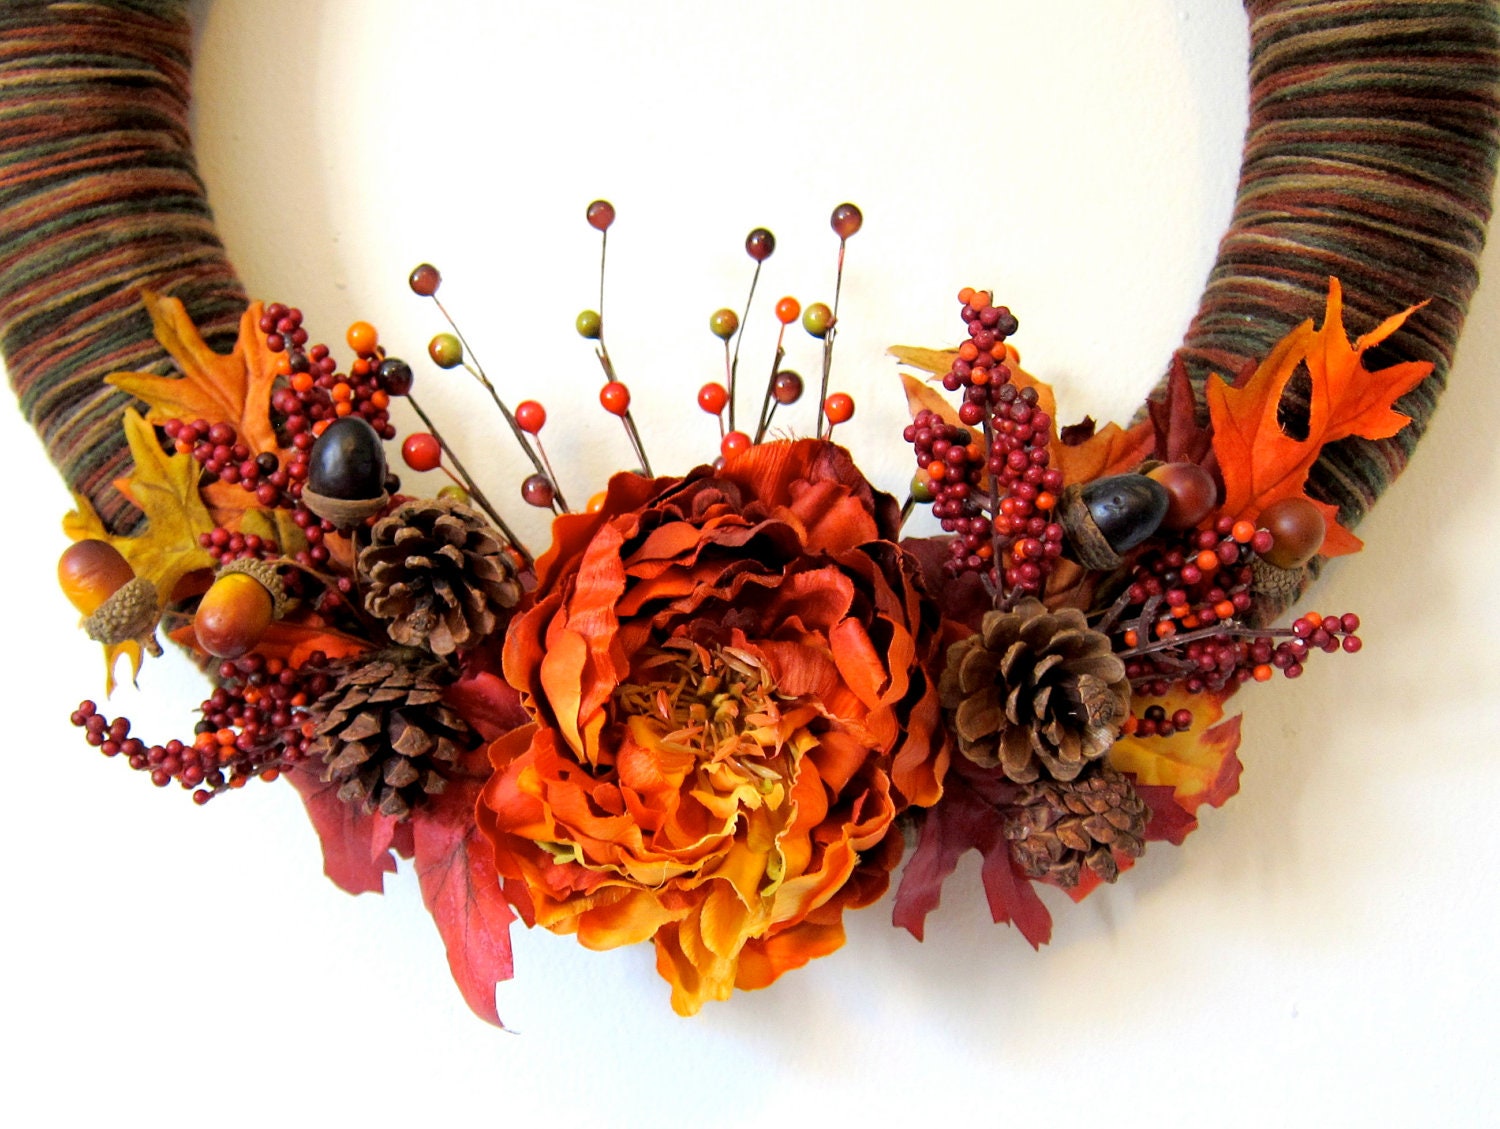 Harvest Wreath - Beautiful Yarn Wreath with Silk Flowers and Naturals - RagamuffinDesign